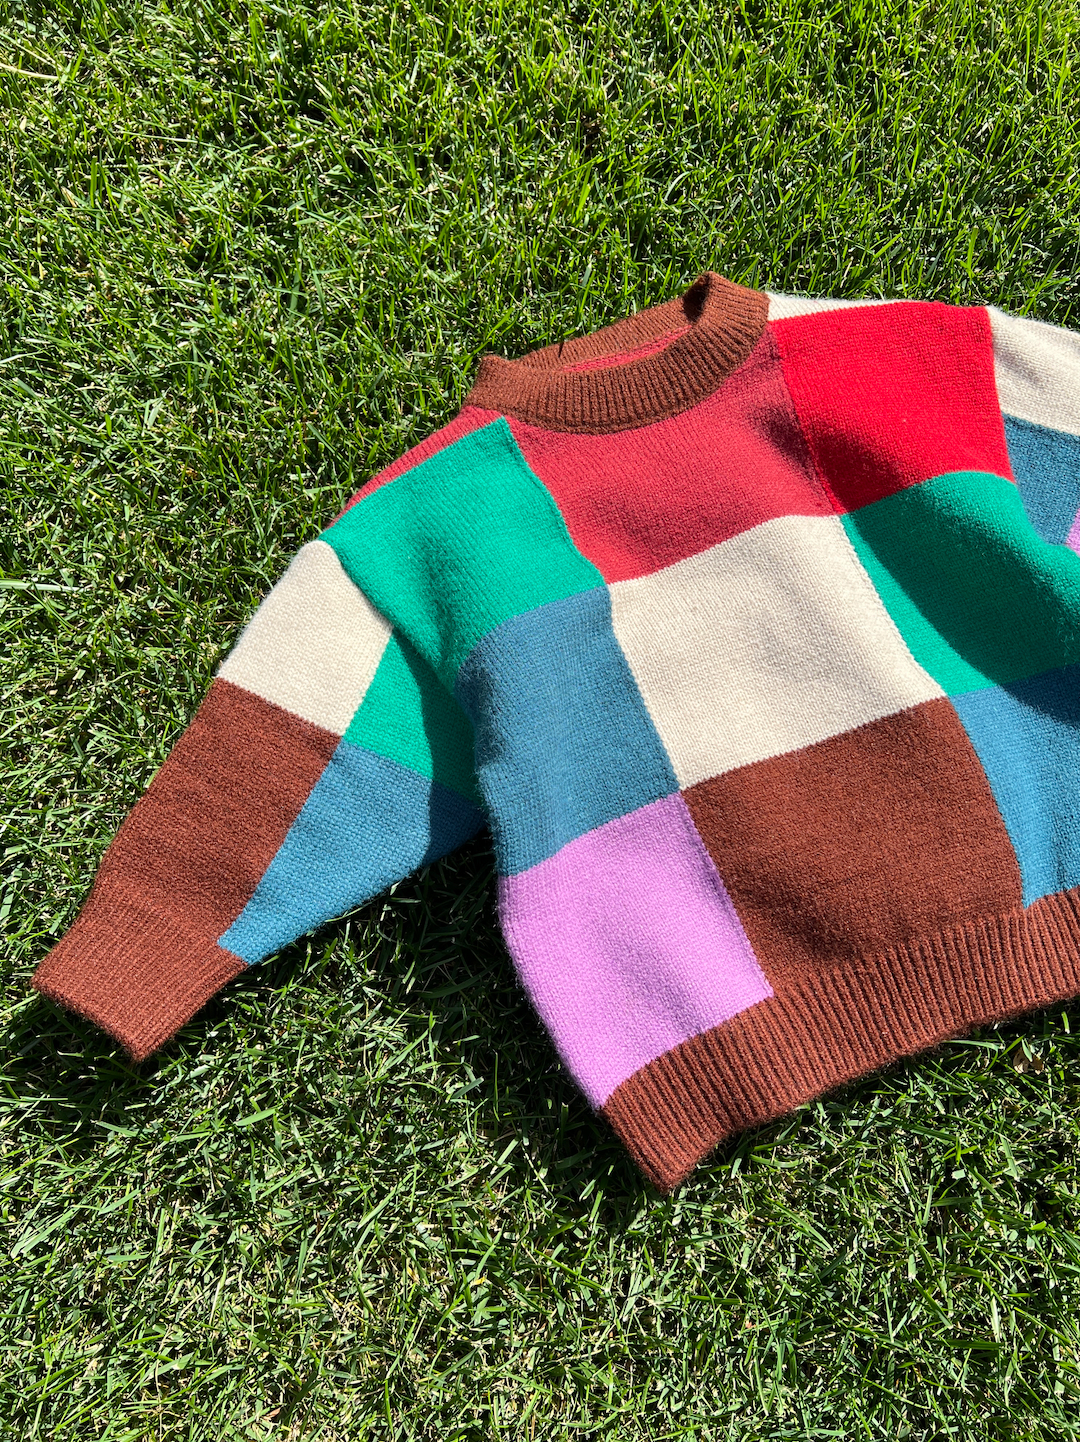 A kids' colorblock sweater laid on grass, in shades of red, pink, cream, brown, blue and green